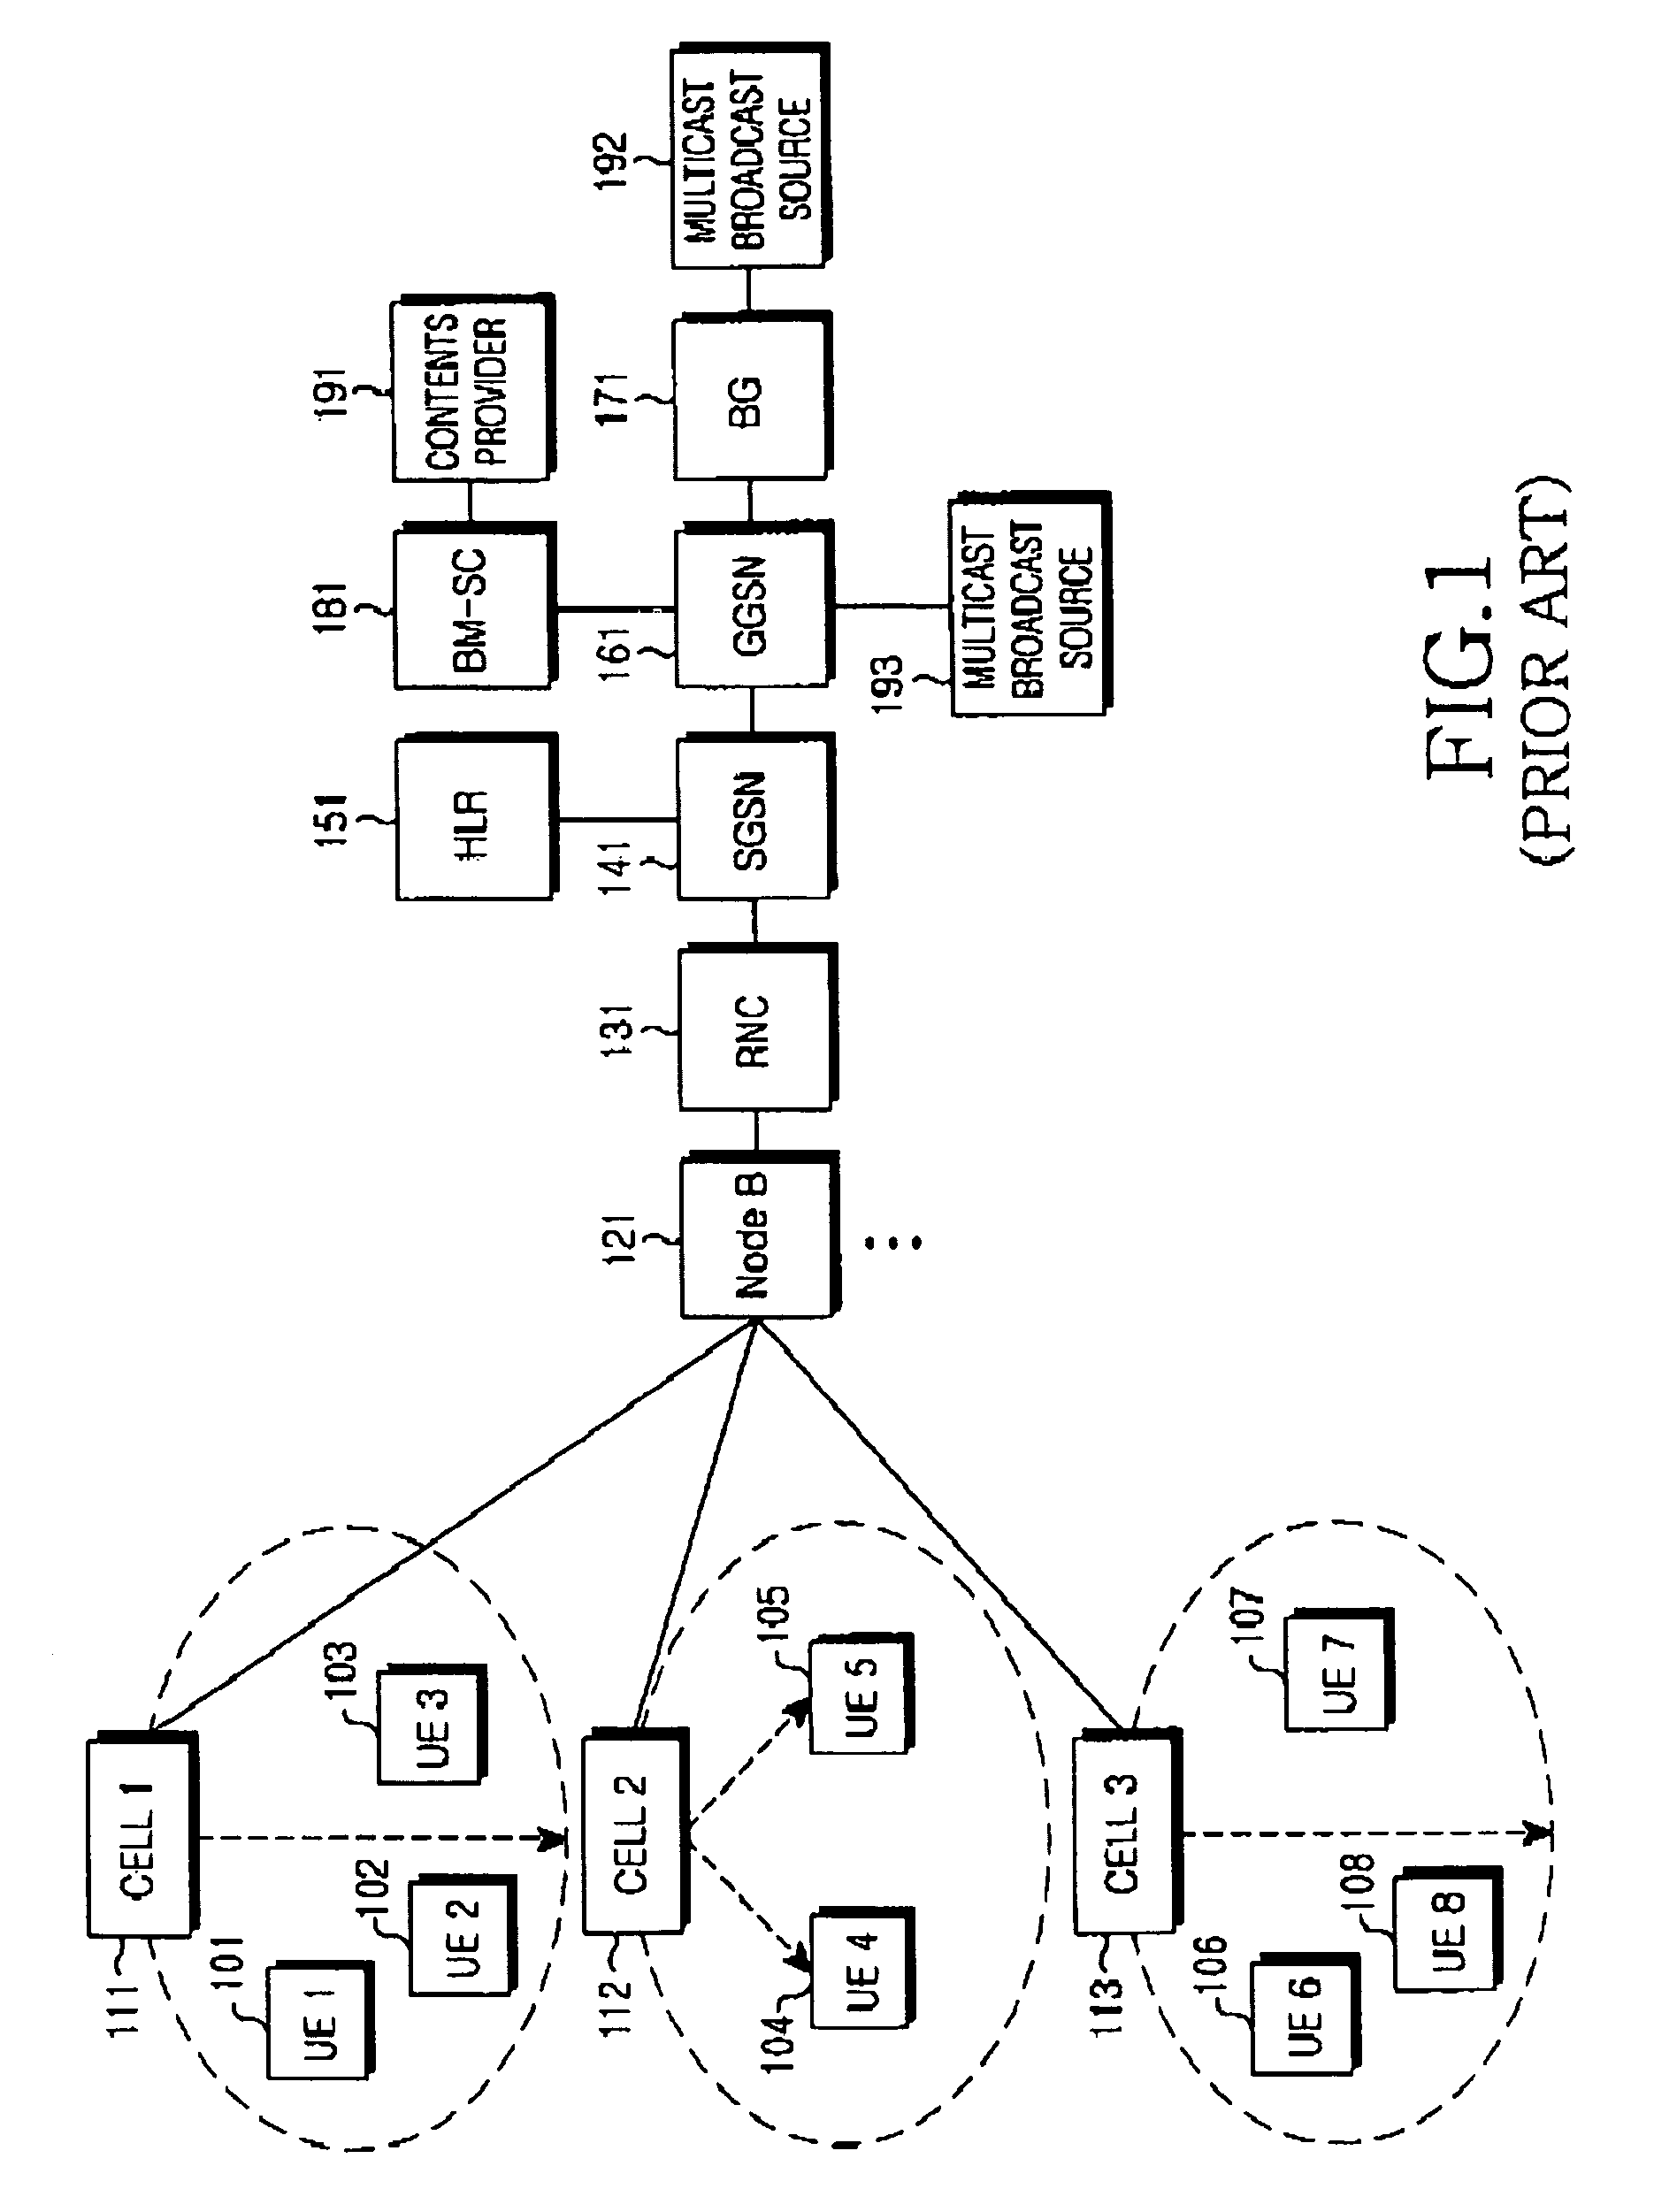 Method for recovering from a received data error in a mobile communication system providing a multimedia broadcast/multicast service